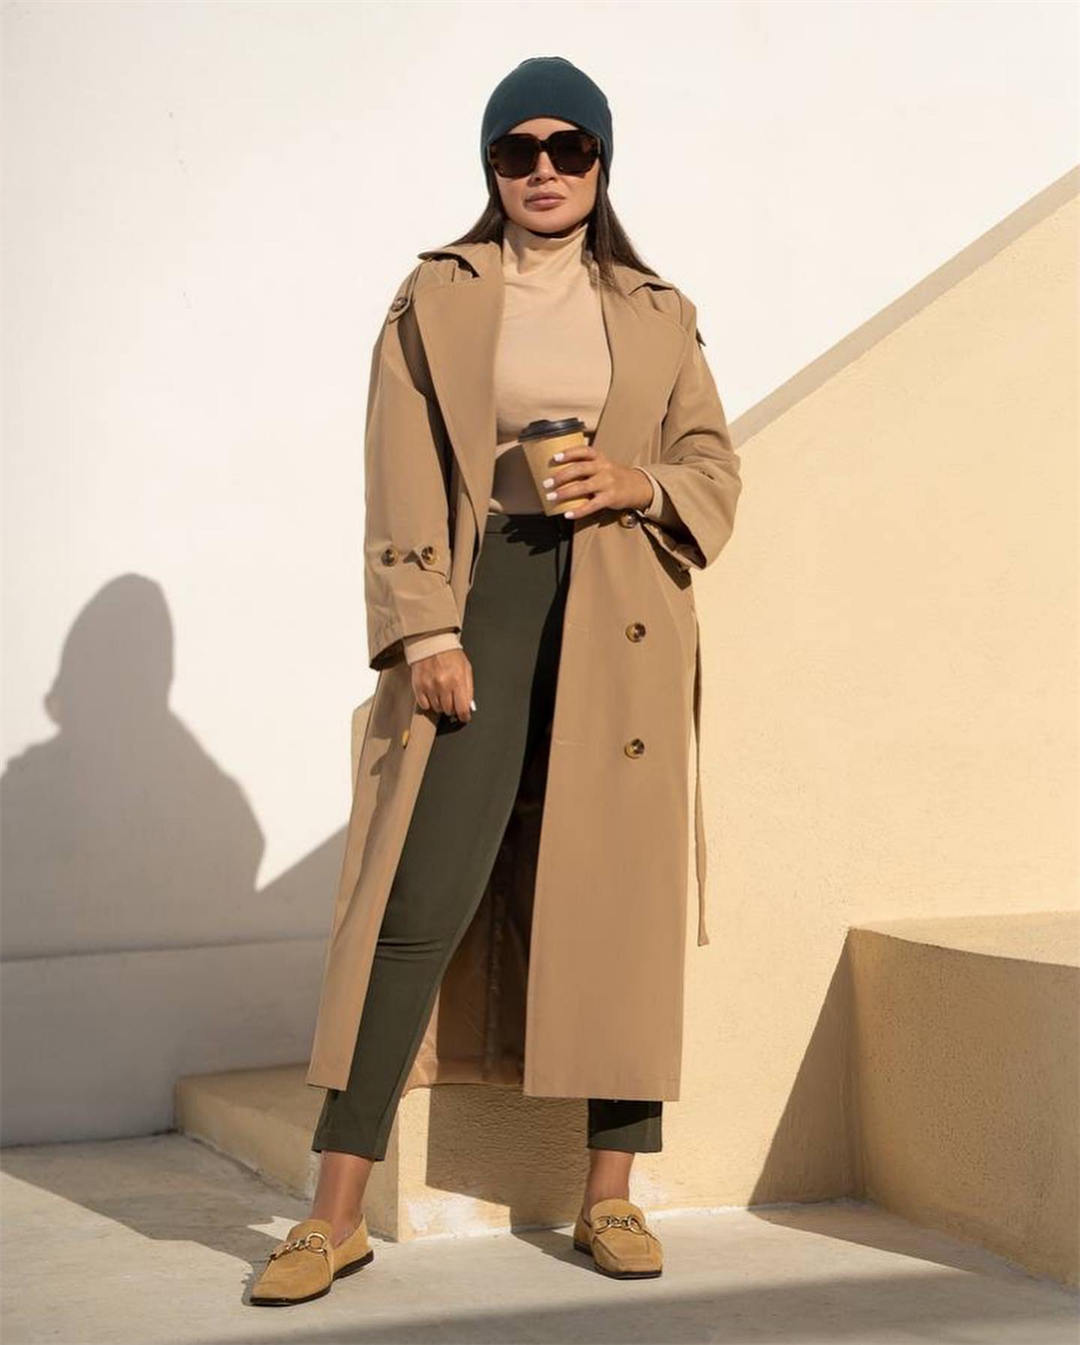 Trench Coat outfit ideas for women 64